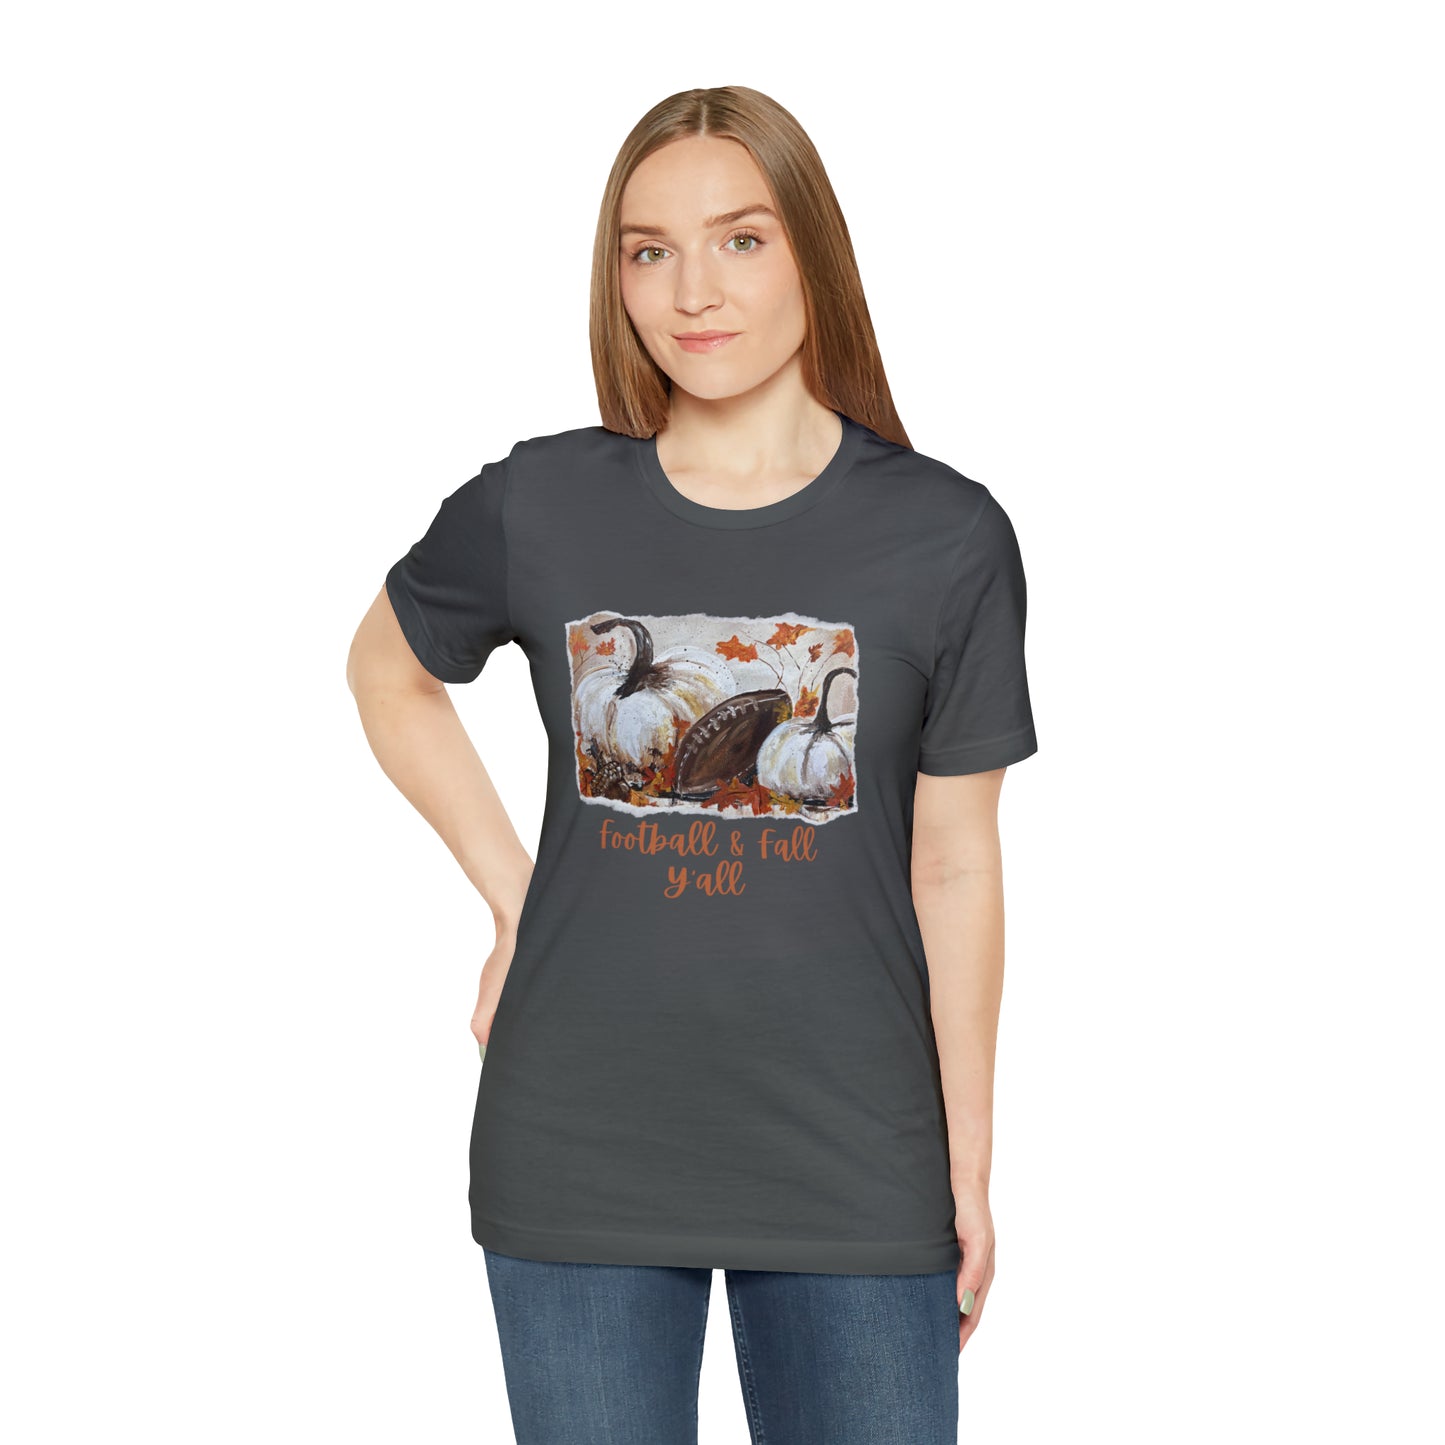 Football and Fall Y'all Unisex Jersey Short Sleeve Tee